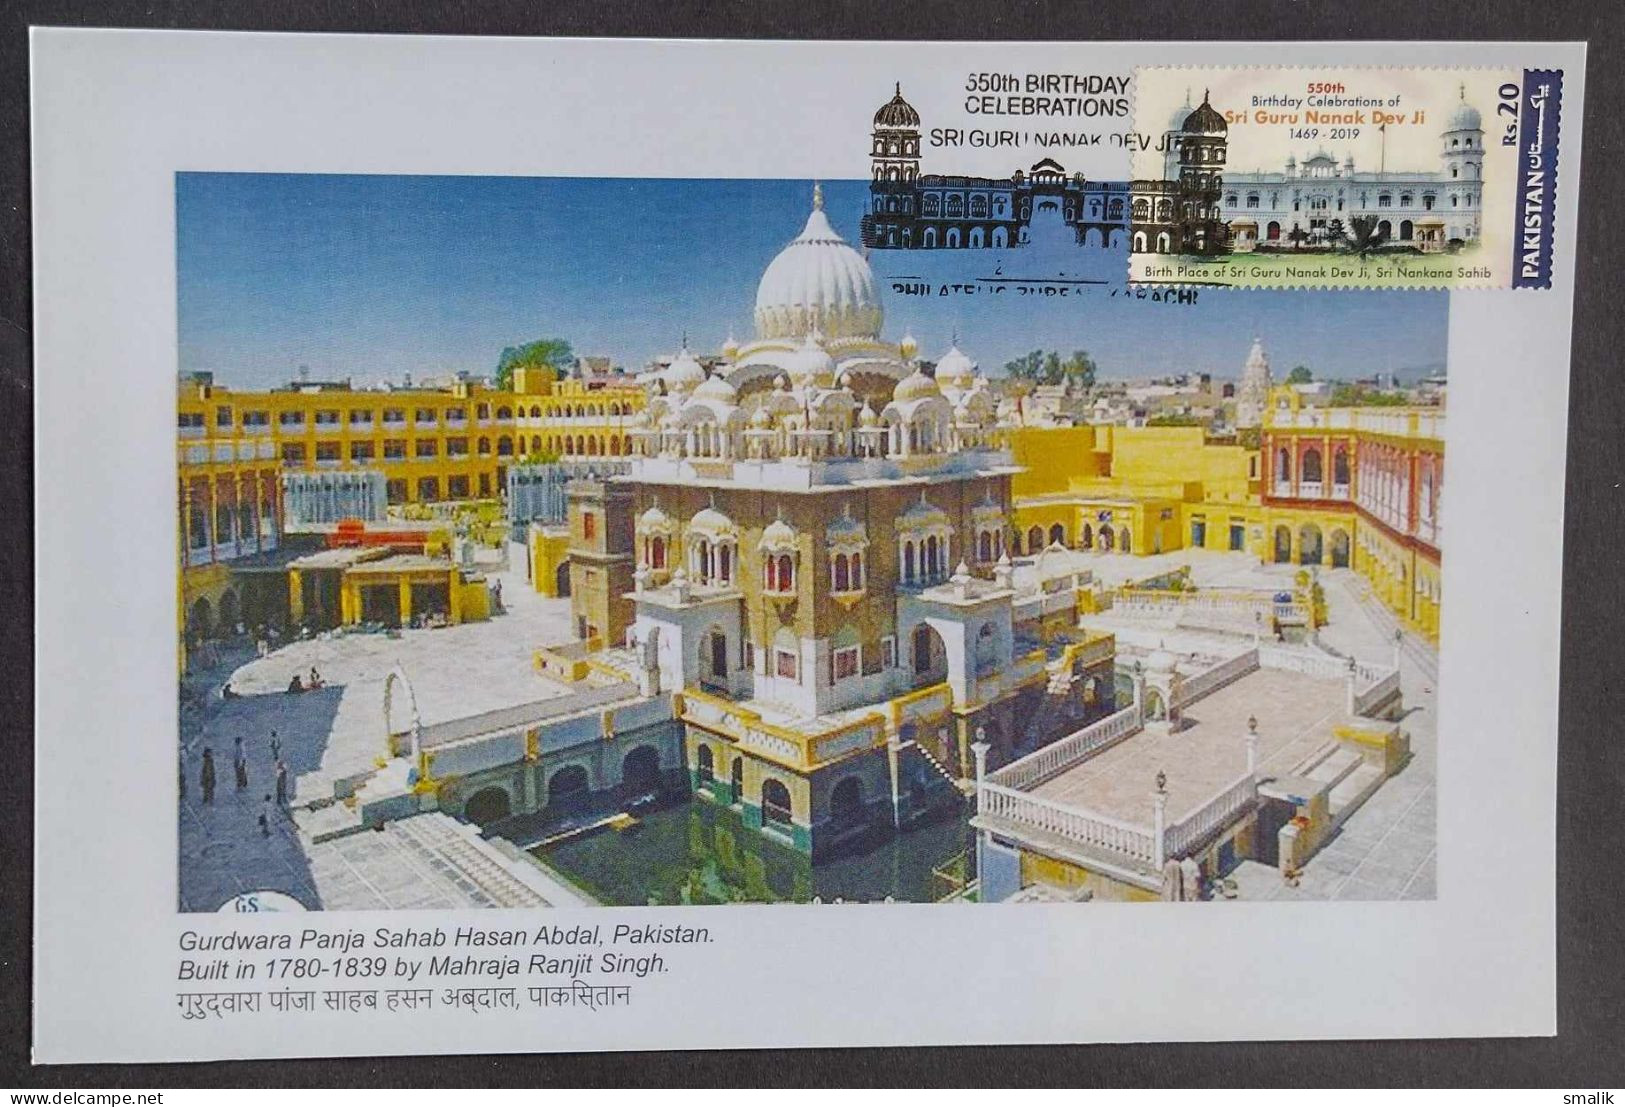 PAKISTAN Picture POST CARD 2019 - Officially Issued On 550th Birthday Of Sri Guru Nanak Dev Ji, Stamped & First Day Canc - Pakistan